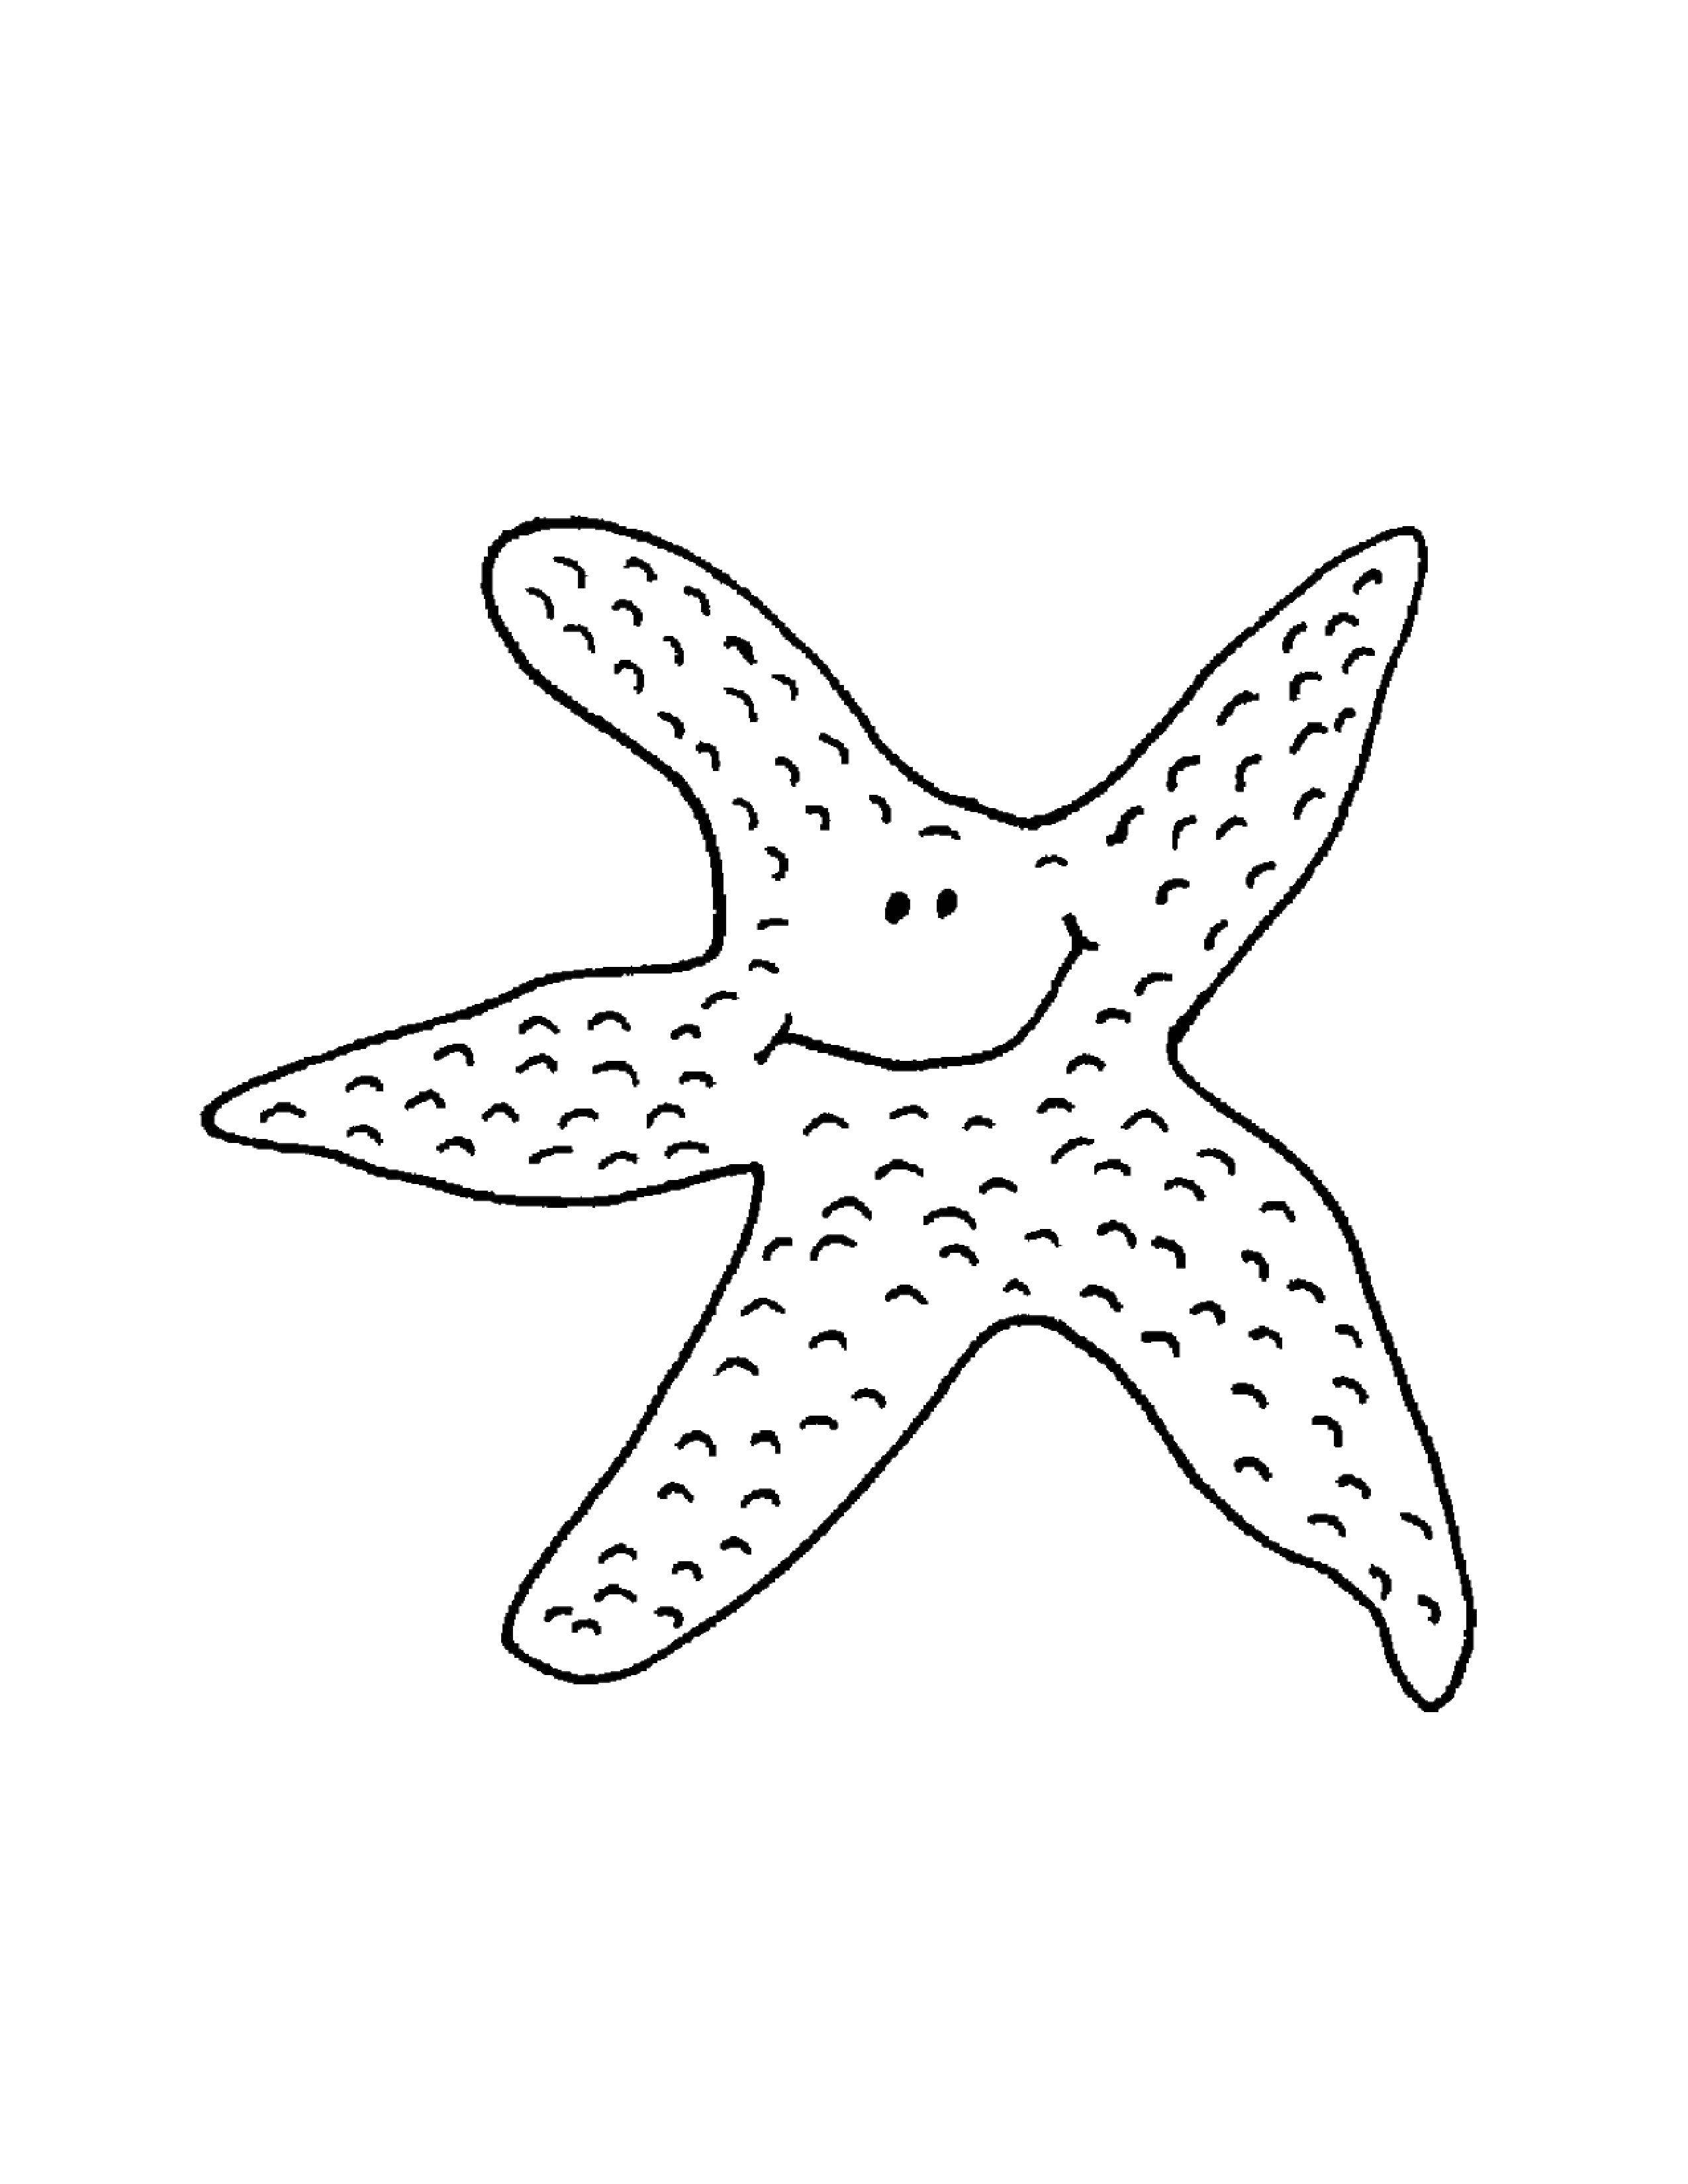 Coloring Starfish. Category marine animals. Tags:  star, smile.